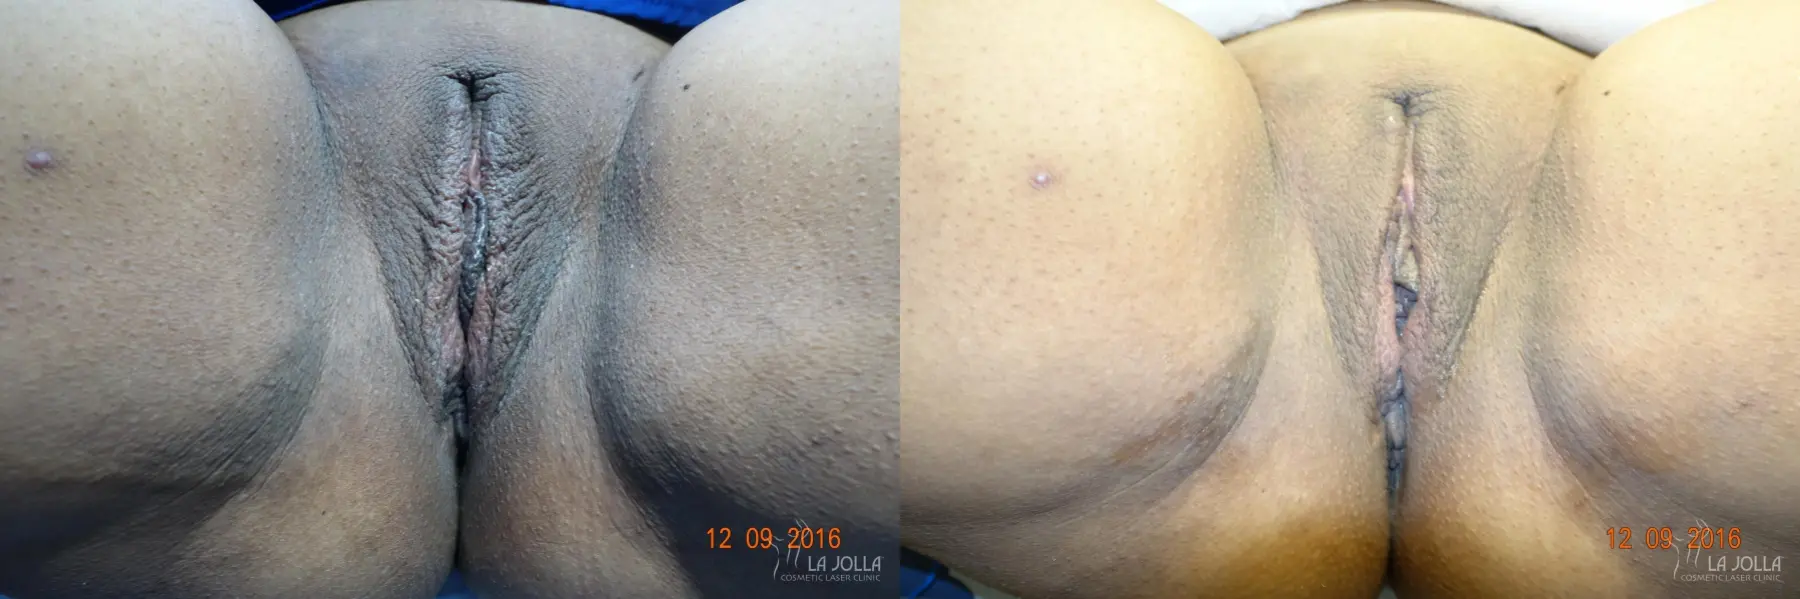 ThermiVa®: Patient 5 - Before and After  